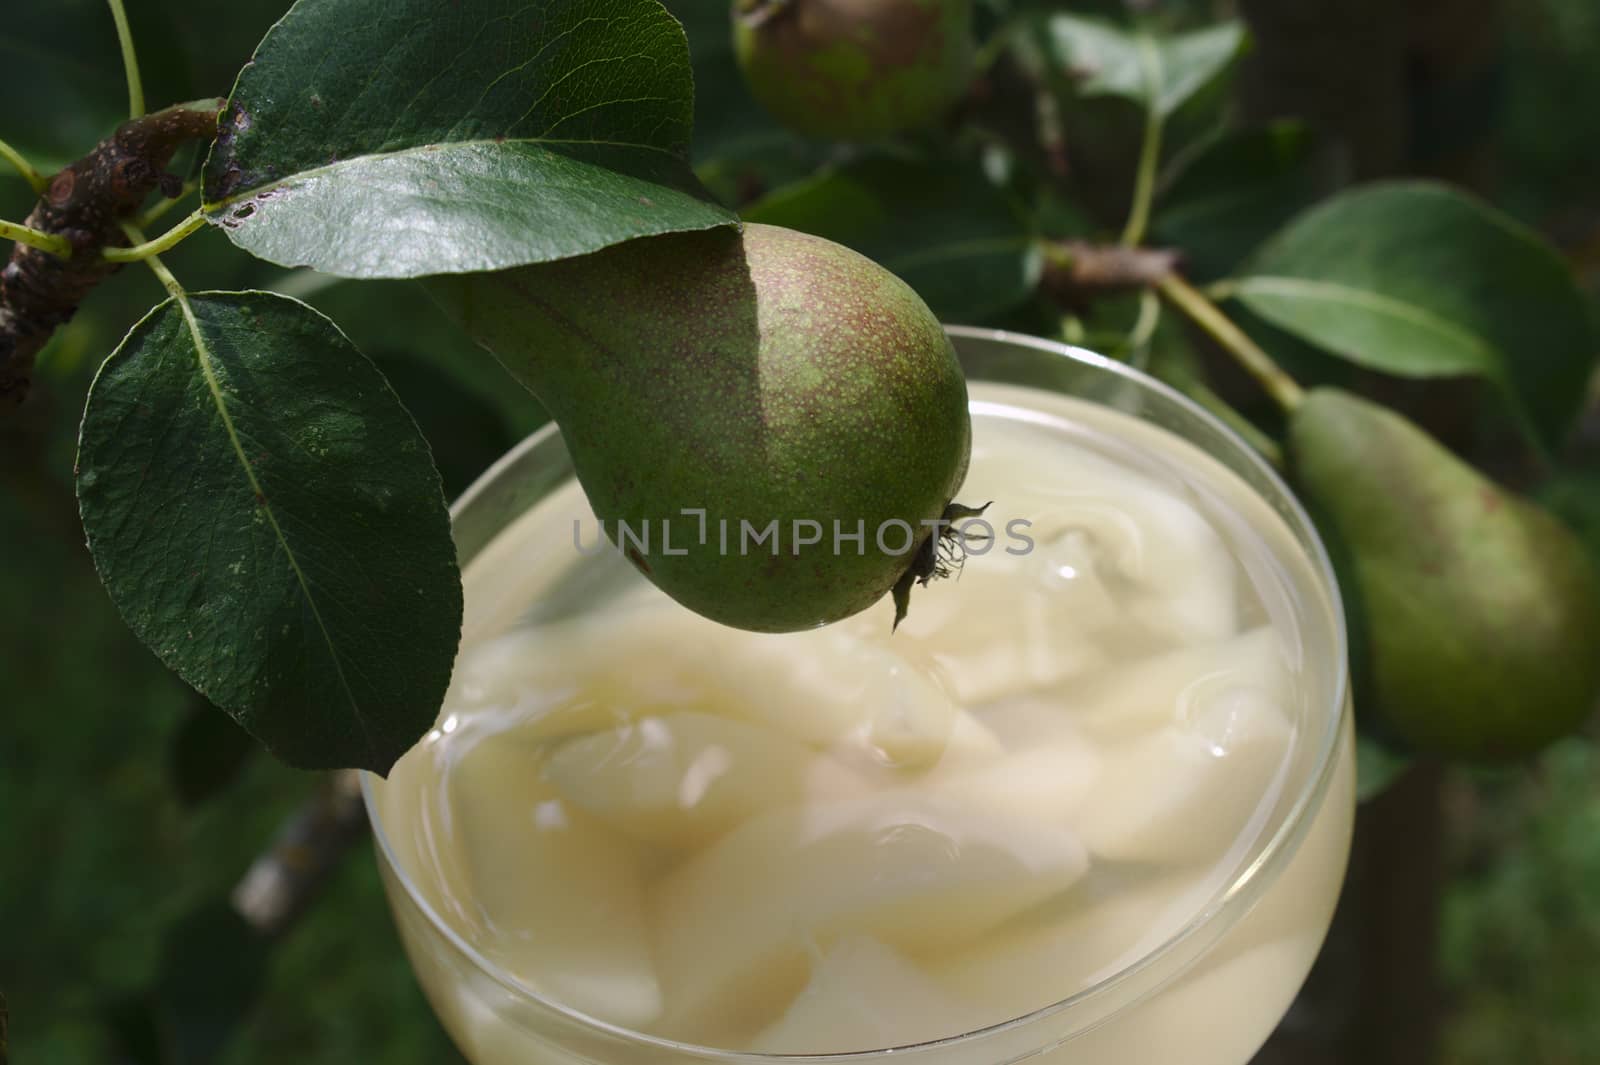 The picture shows a pear dessert on a pear tree